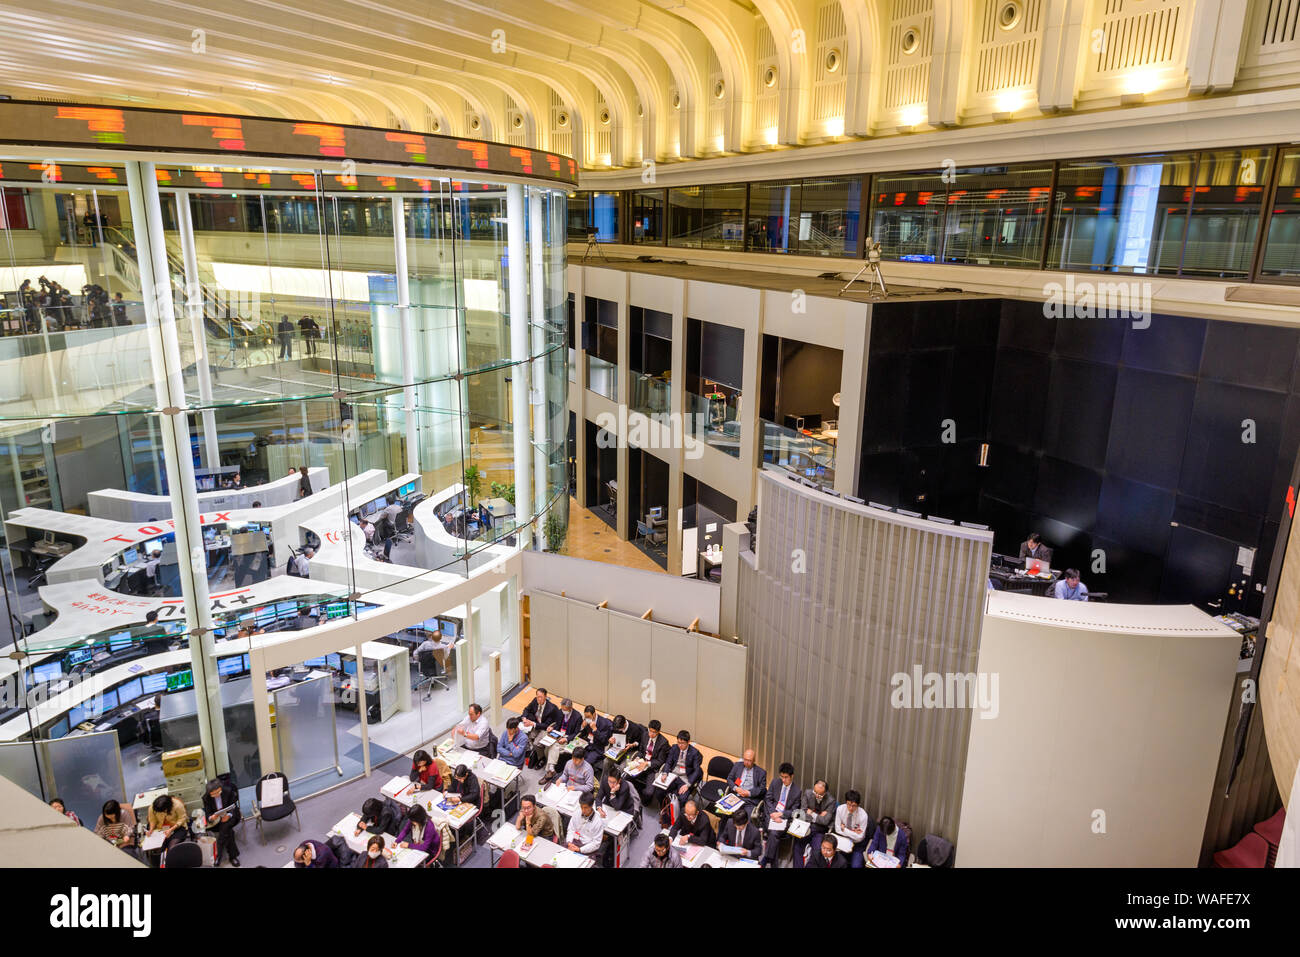 TOKYO, JAPAN - DECEMBER 28, 2012: News reporters set up inside the Tokyo Stock Exchange. It is the third largest exchange in the world. Stock Photo